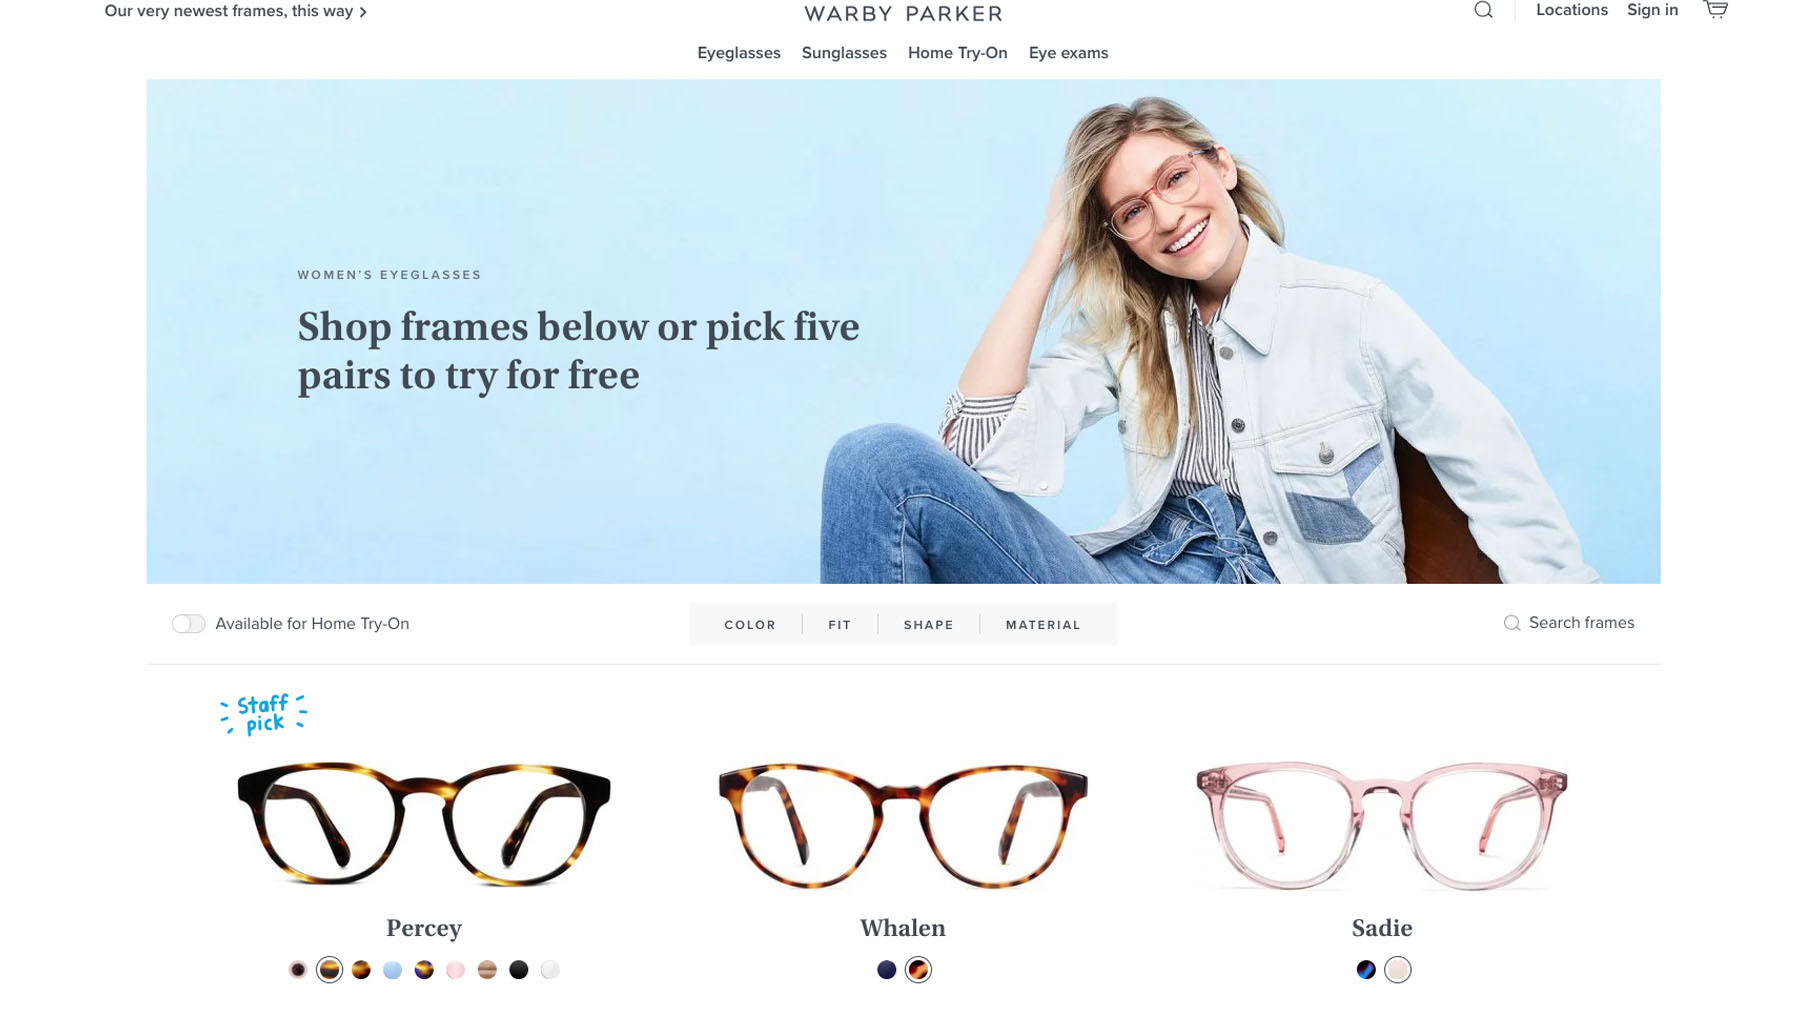 Top eCommerce site with excellent service - Warby Parker